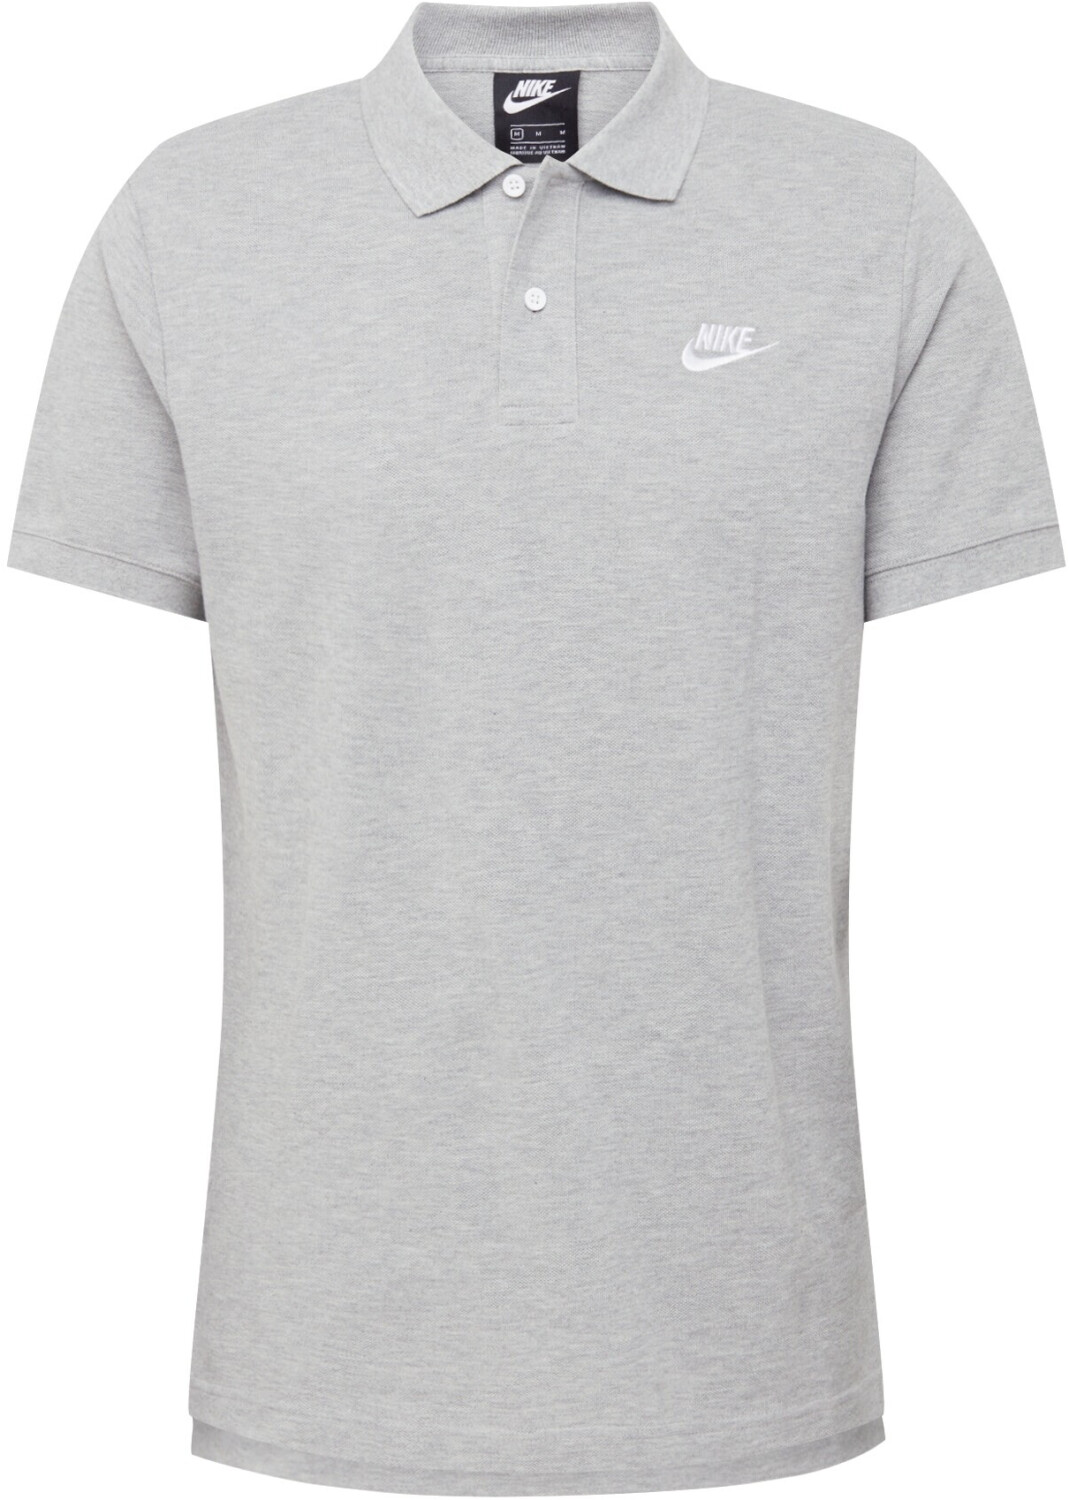 Achat Polo Blanc Homme Nike Matchup pas cher